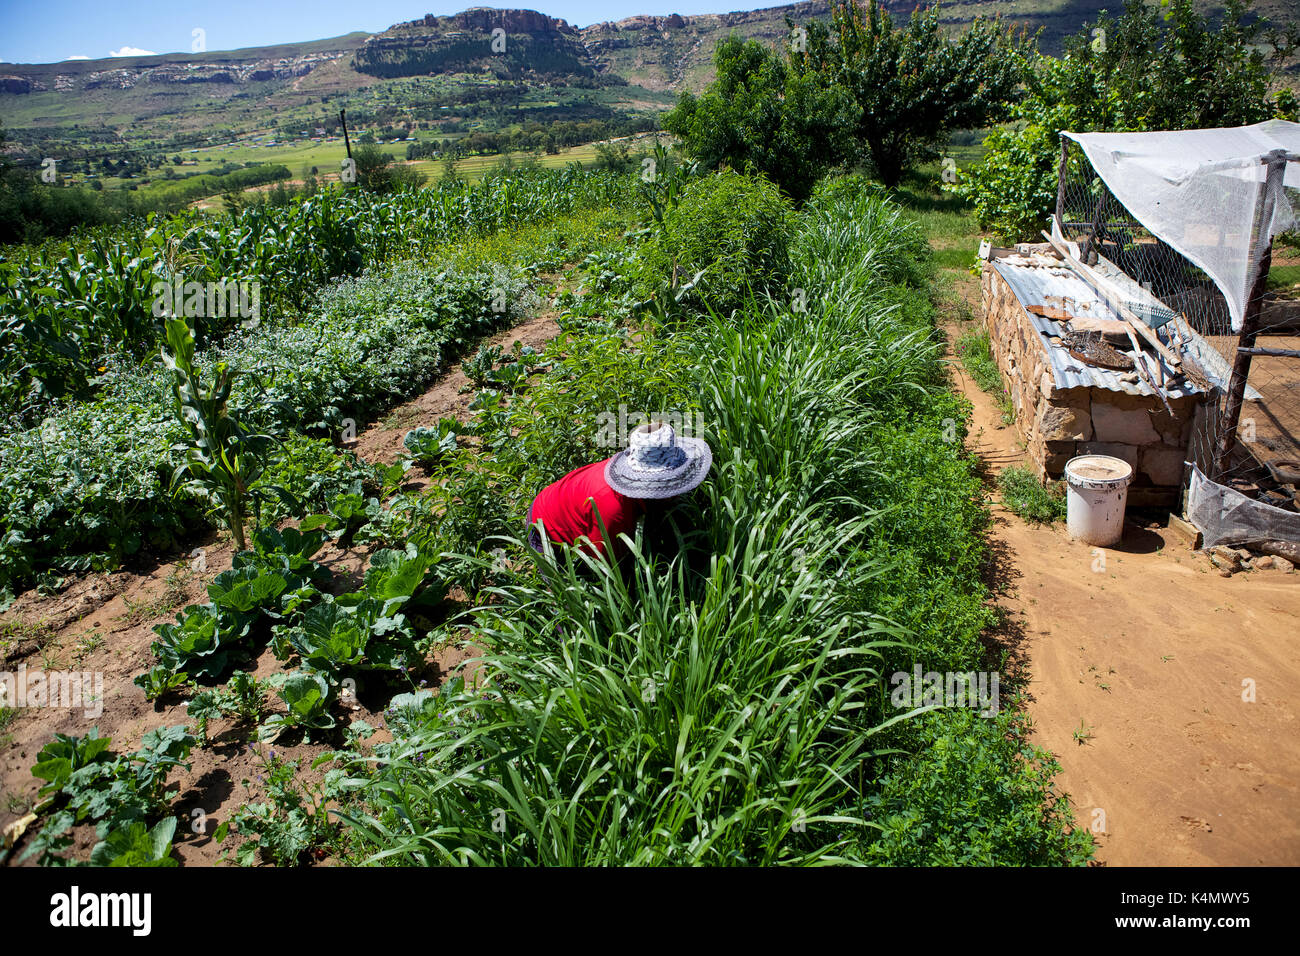 A female farmer weeding her vegetables in rural Lesotho, Africa Stock Photo